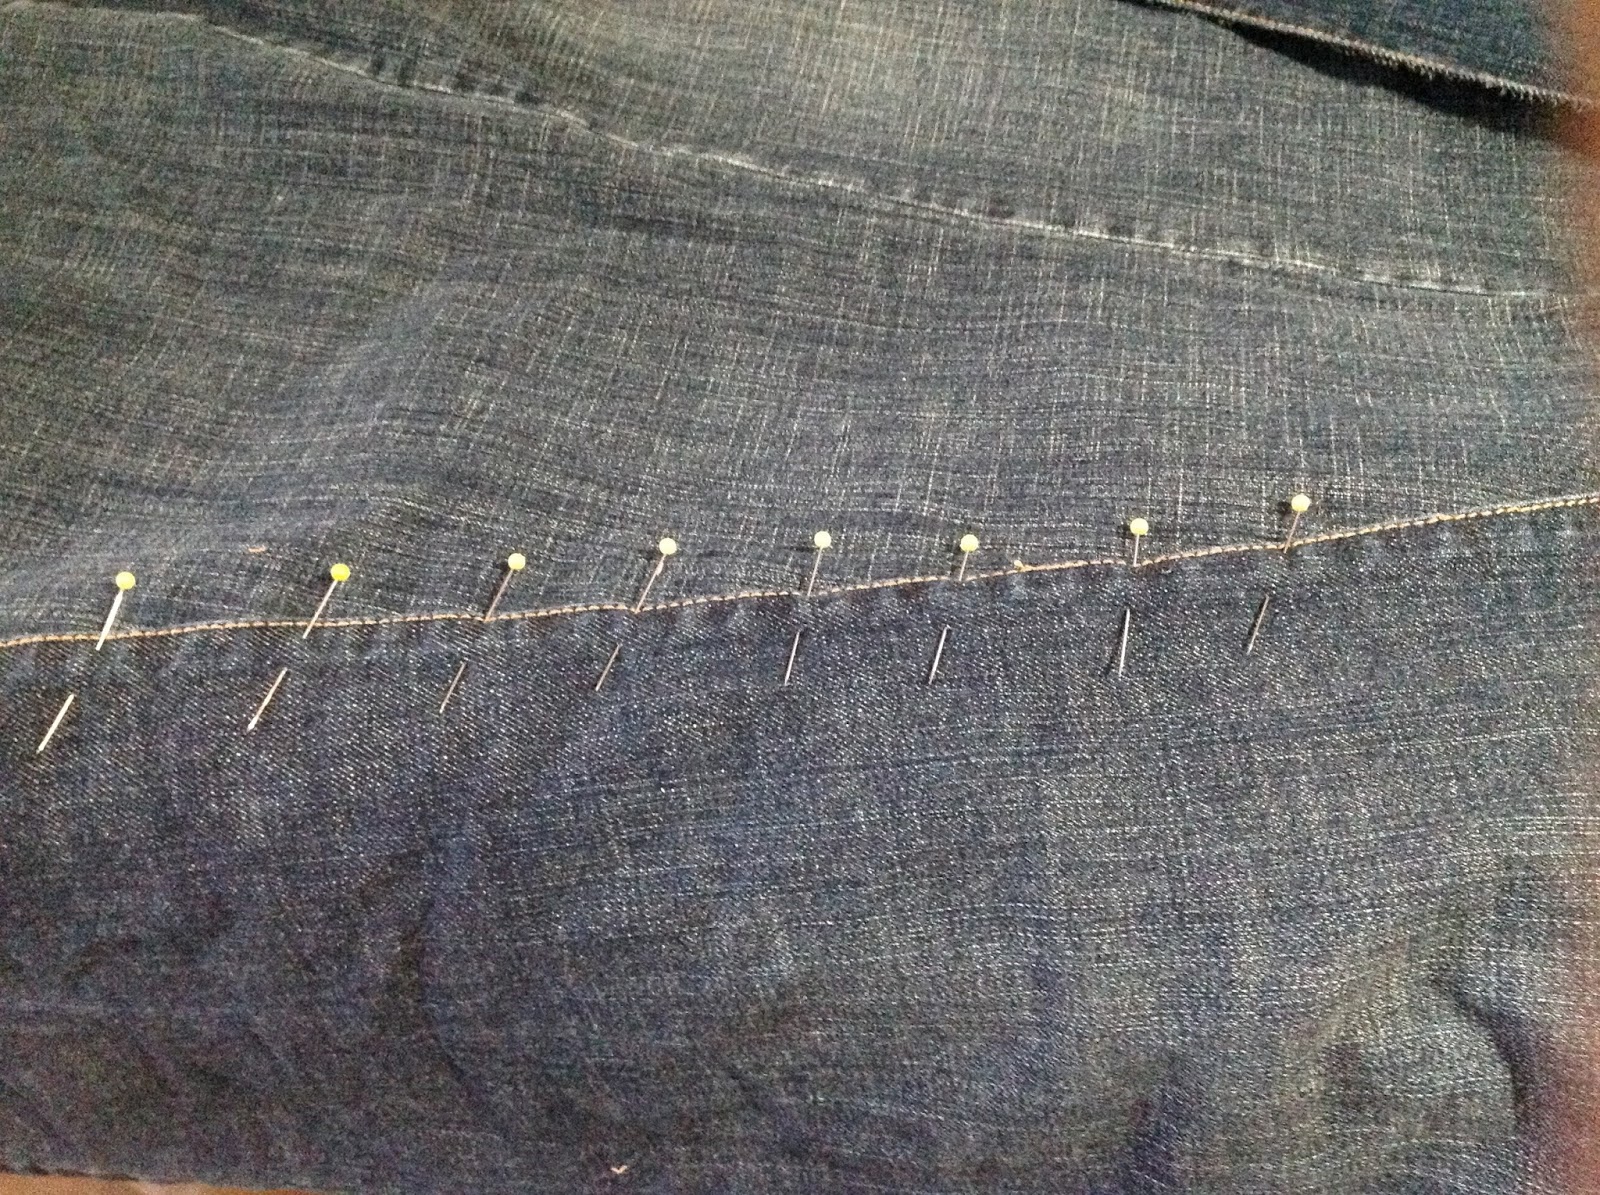 Crunchy Goodness Urban Homesteading: How to turn Jeans into a skirt!